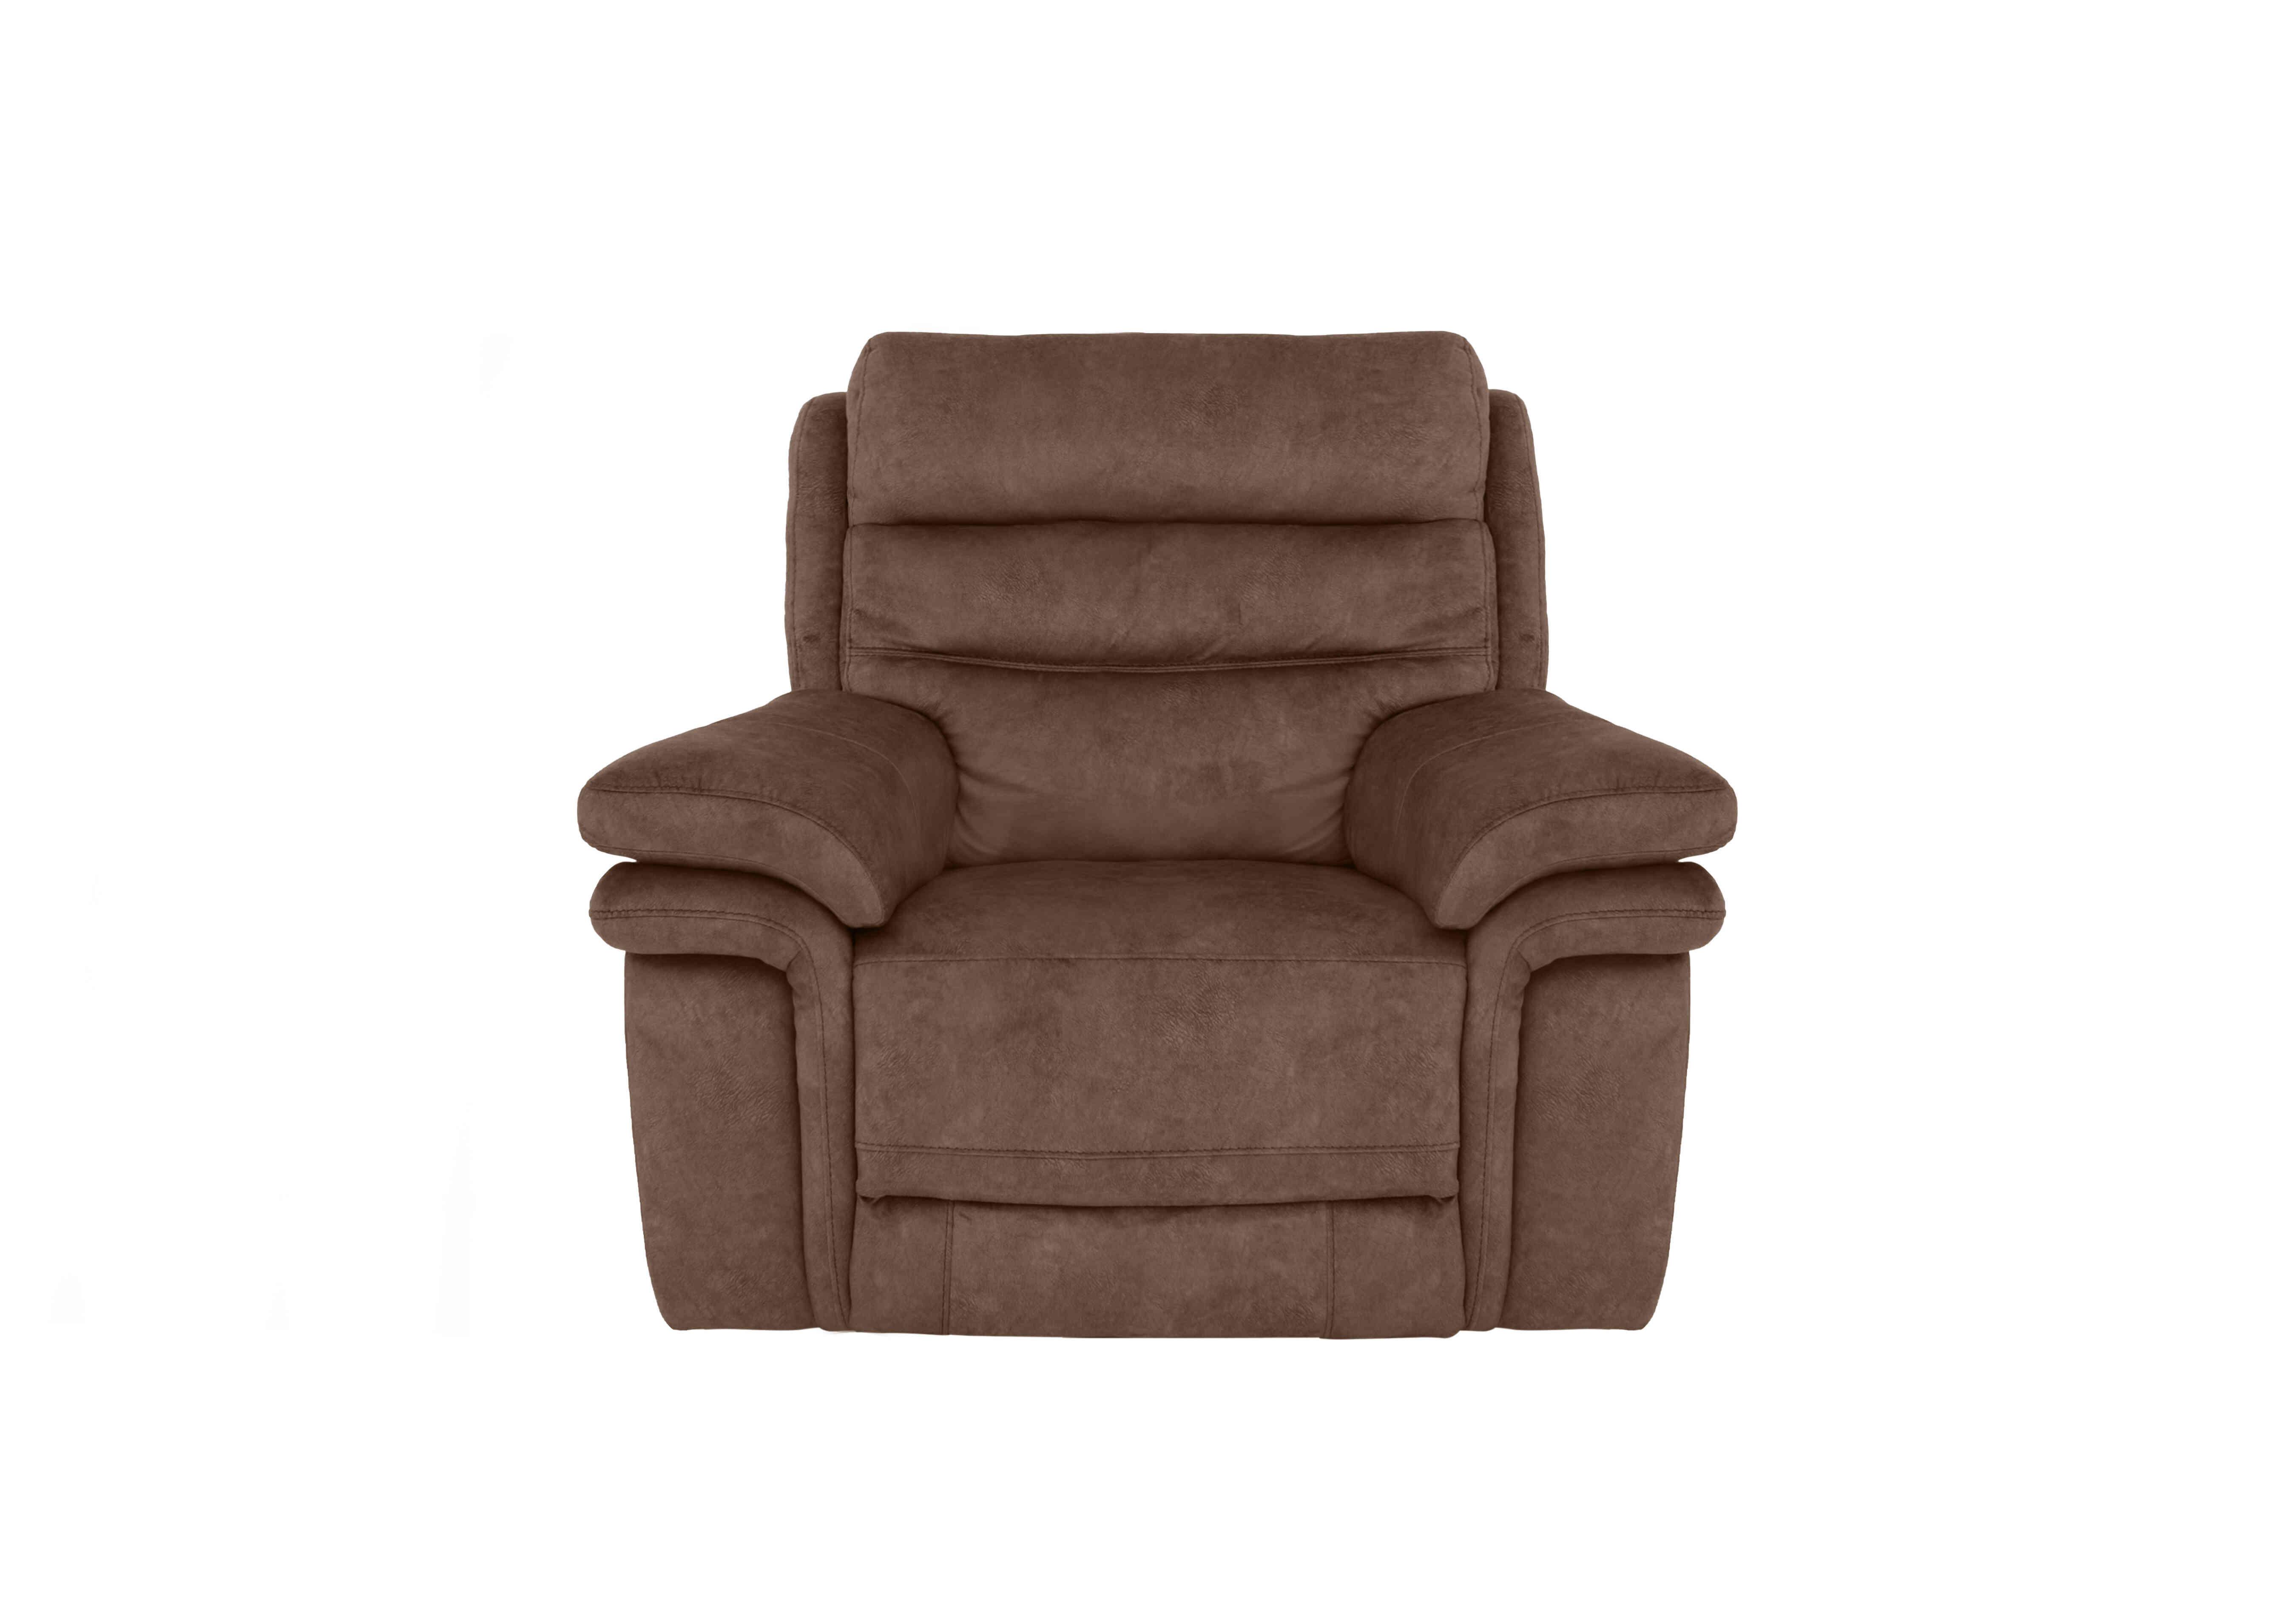 Berlin Fabric Chair in Classic Brown Be-0105 on Furniture Village